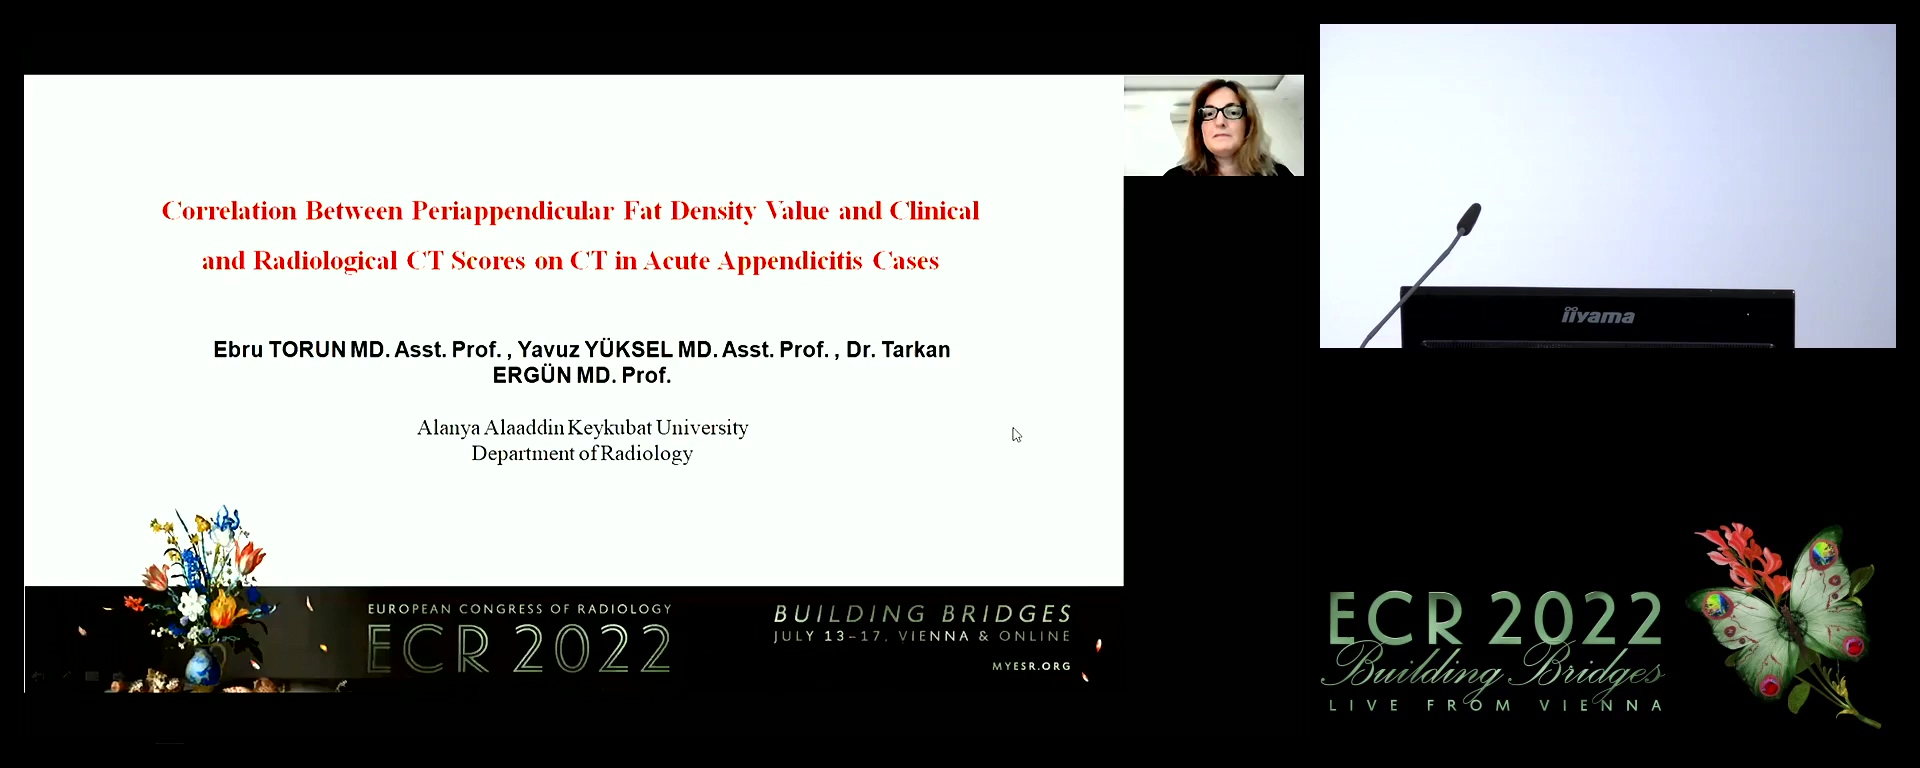 Correlation between periappendicular fat density value and clinical and radiological CT scores on CT in acute appendicitis cases - Ebru Torun, Antalya / TR